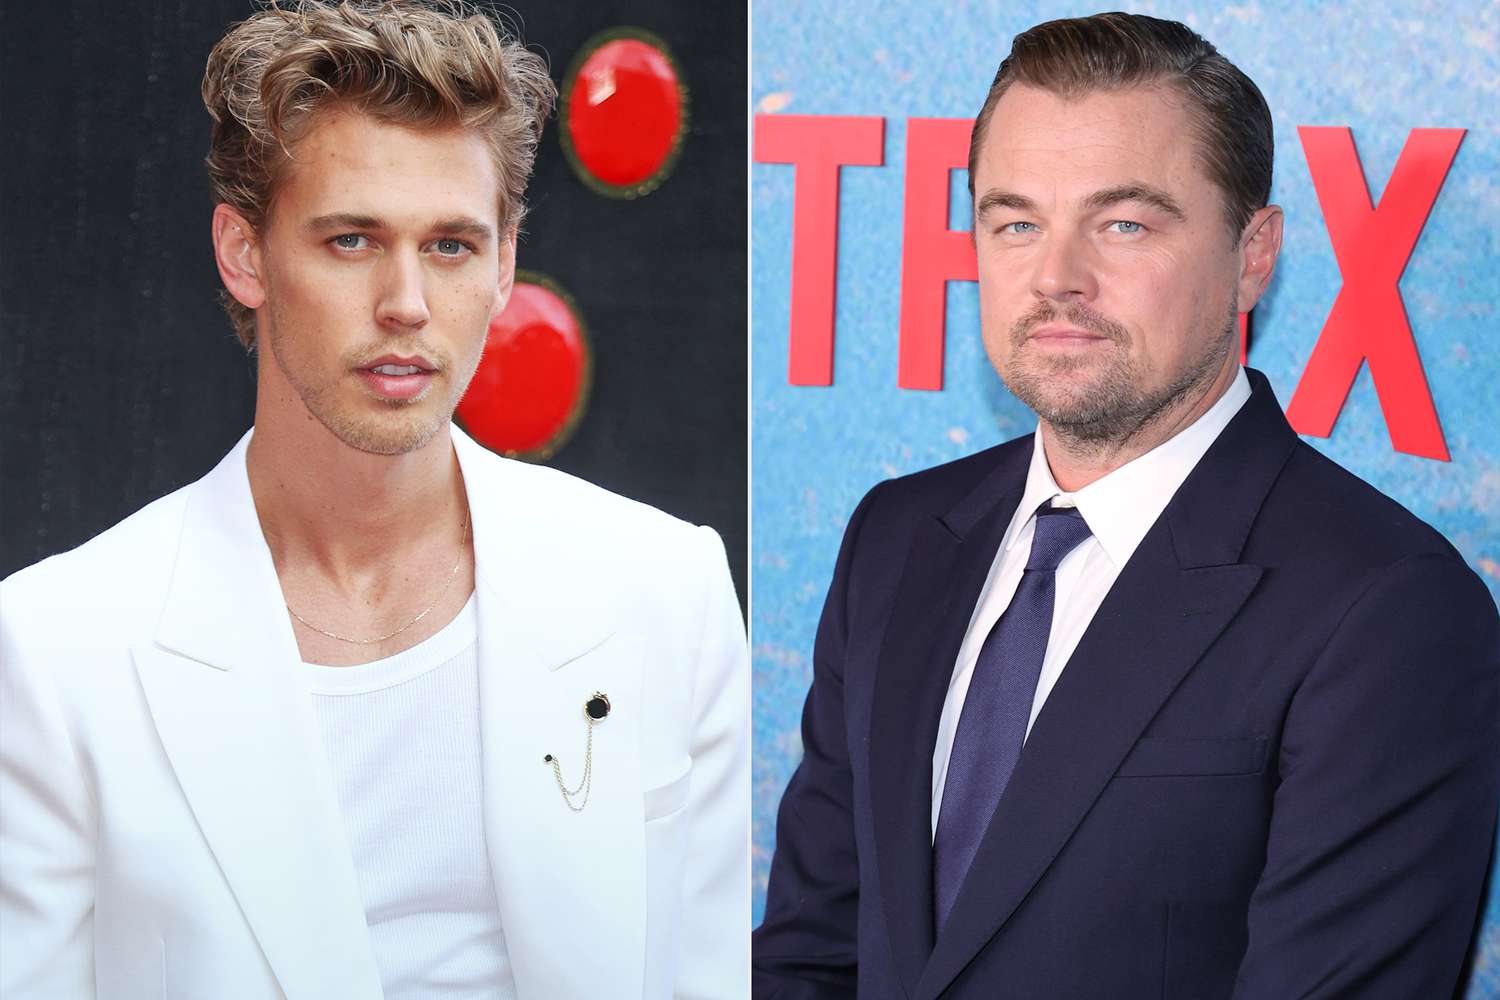 Austin Butler attends the Elvis" UK Special Screening at BFI Southbank on May 31, 2022 in London, England. (Photo by Mike Marsland/WireImage); Leonardo DiCaprio attends the world premiere of Netflix's "Don't Look Up" on December 05, 2021 in New York City. (Photo by Theo Wargo/WireImage,)